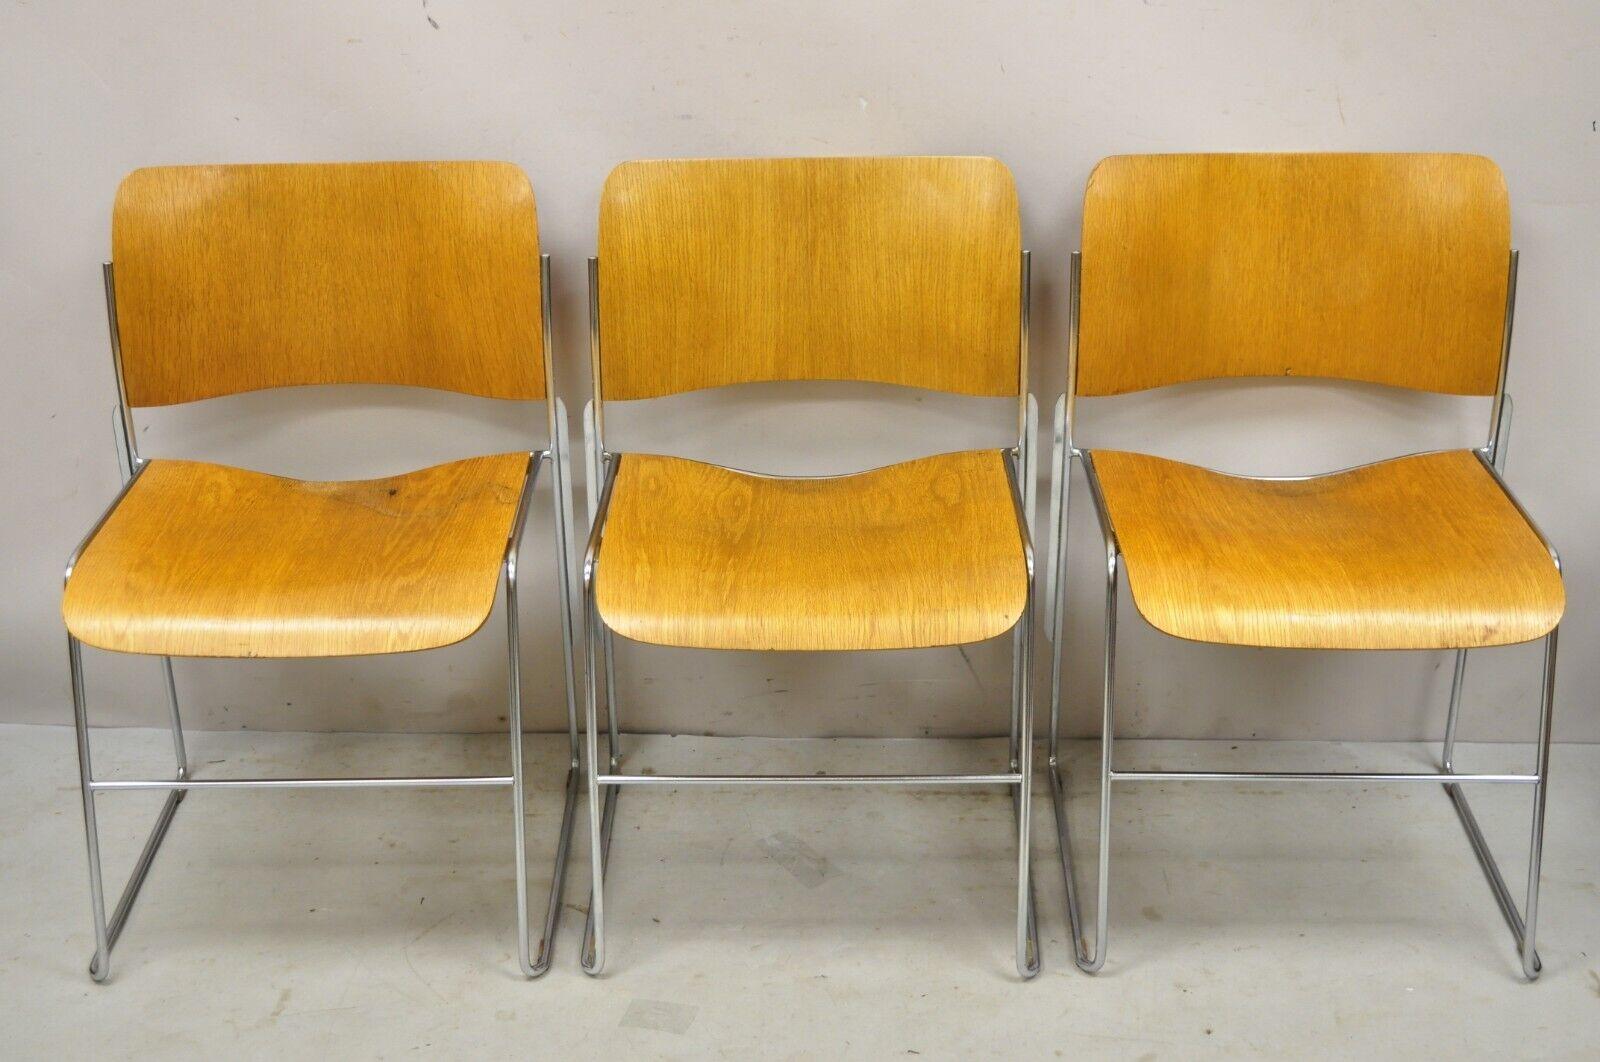 David Rowland 40/4 Bentwood Chrome Frame Stacking Side Chairs, Set of 3 For Sale 5